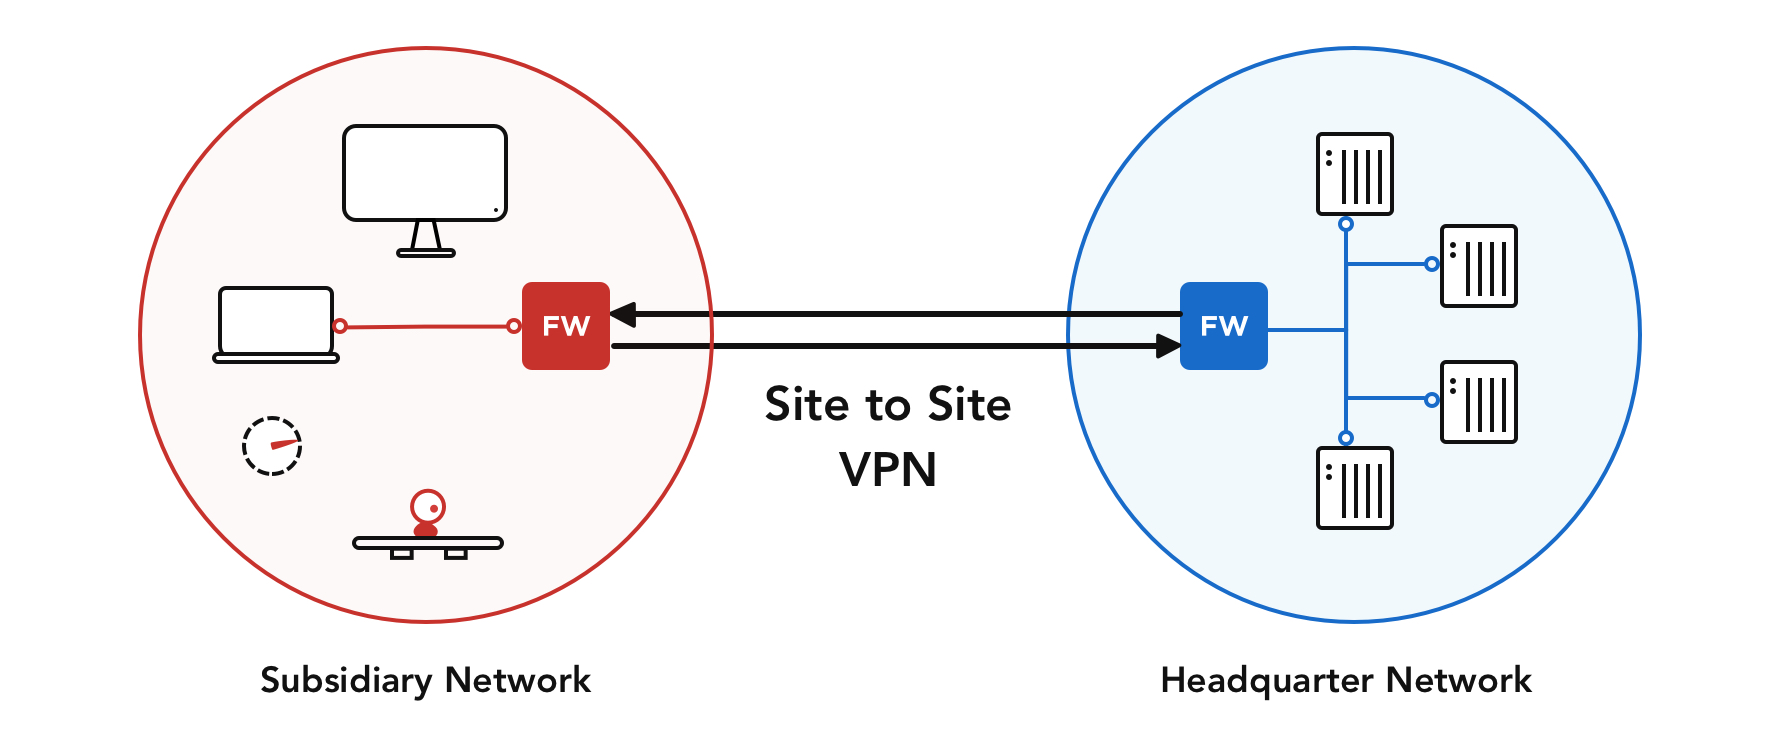 Multiple firewalla devices can be setup with site-to-site VPN from subsidiary to headquarter networks